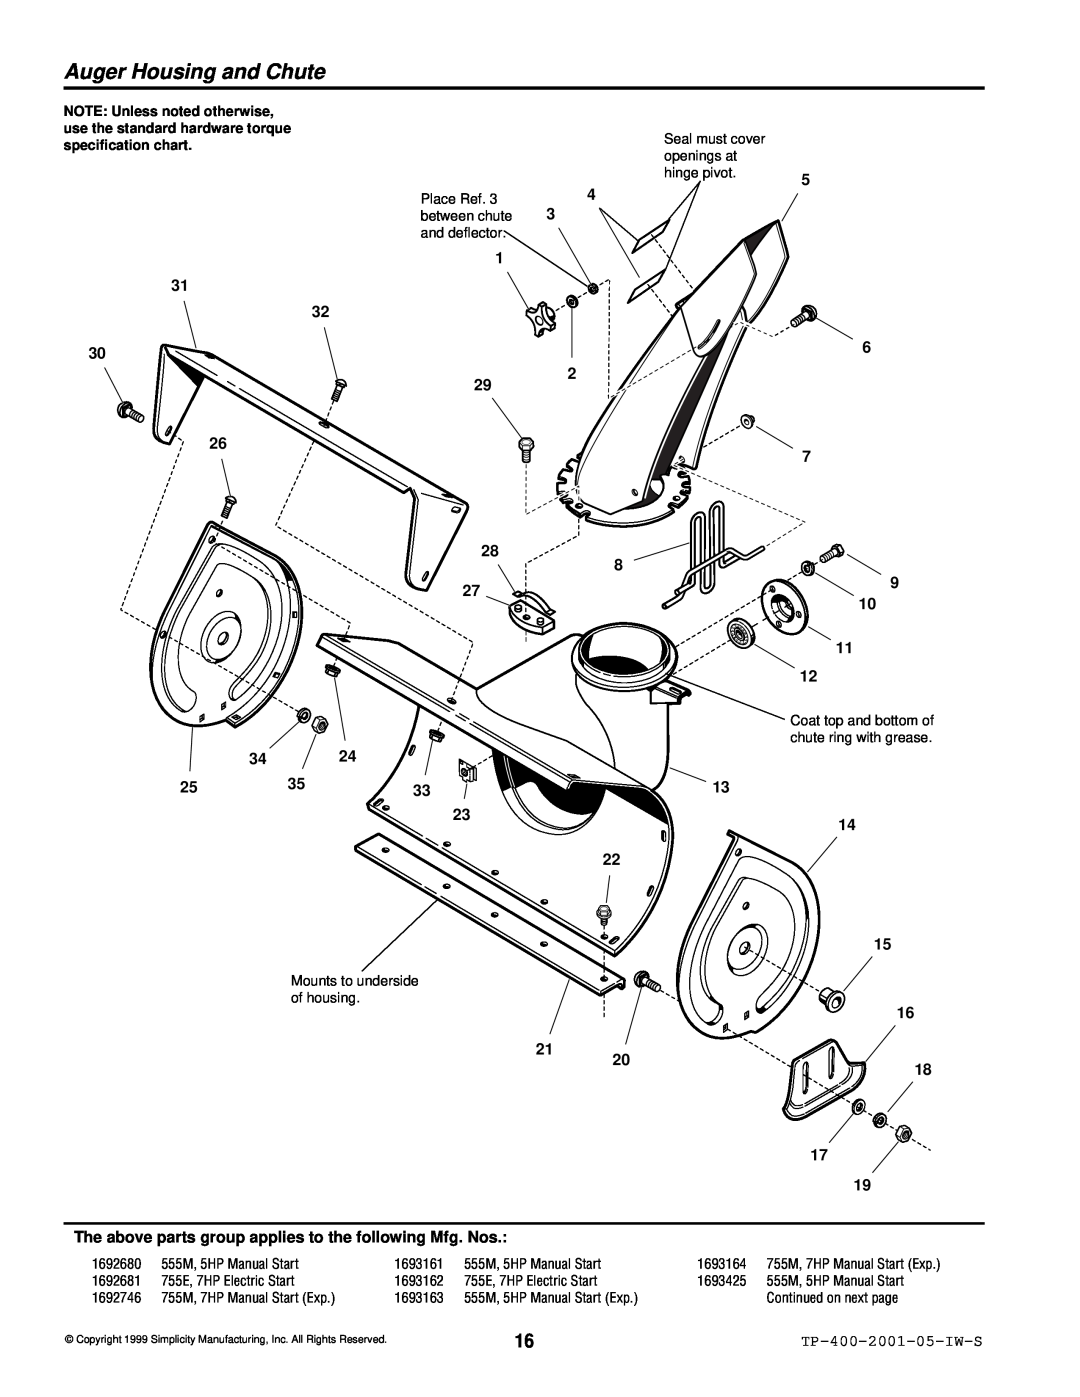 Simplicity 1693161 Auger Housing and Chute, The above parts group applies to the following Mfg. Nos, TP-400-2001-05-IW-S 